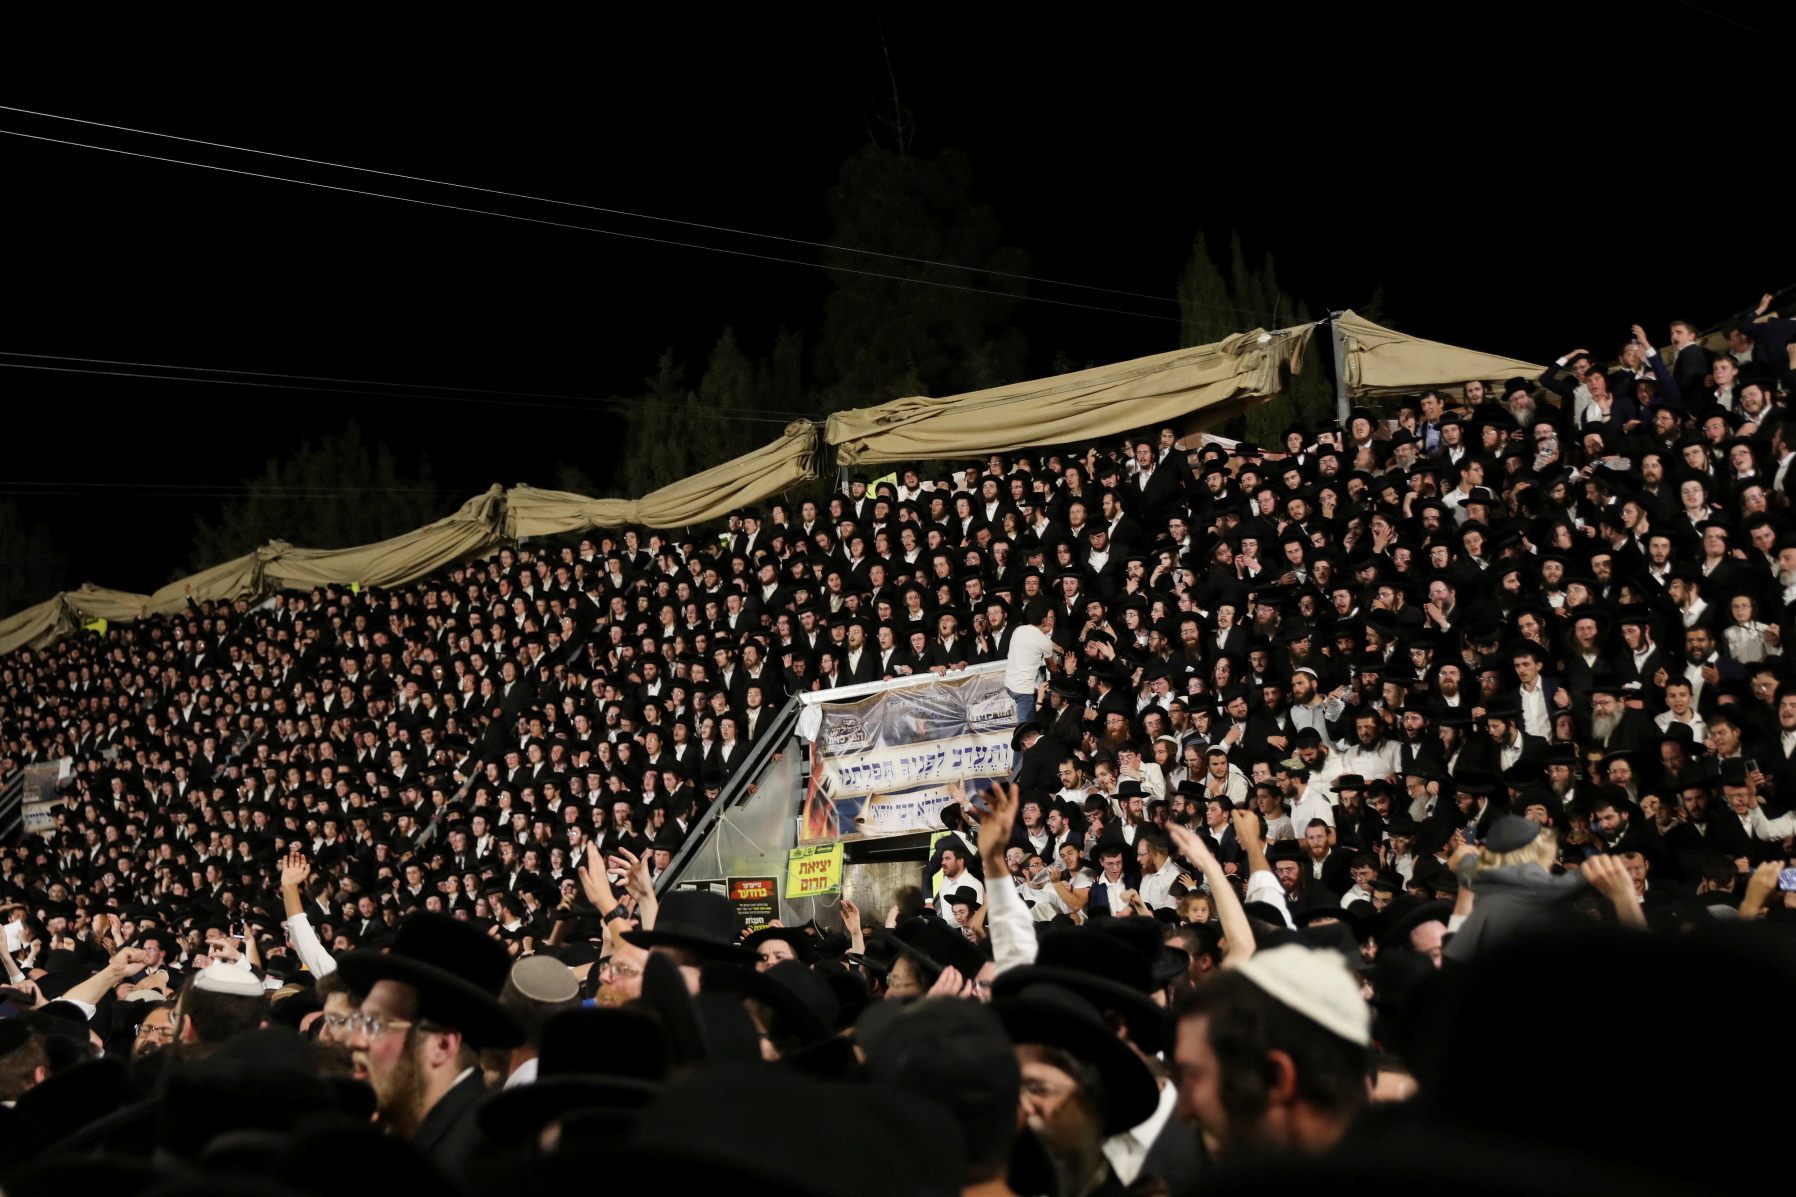 Jewish worshippers sing and dance as they stand on tribunes at the Lag B'Omer event in Mount Meron, northern Israel, April 29, 2021. REUTERS/ Stringer 